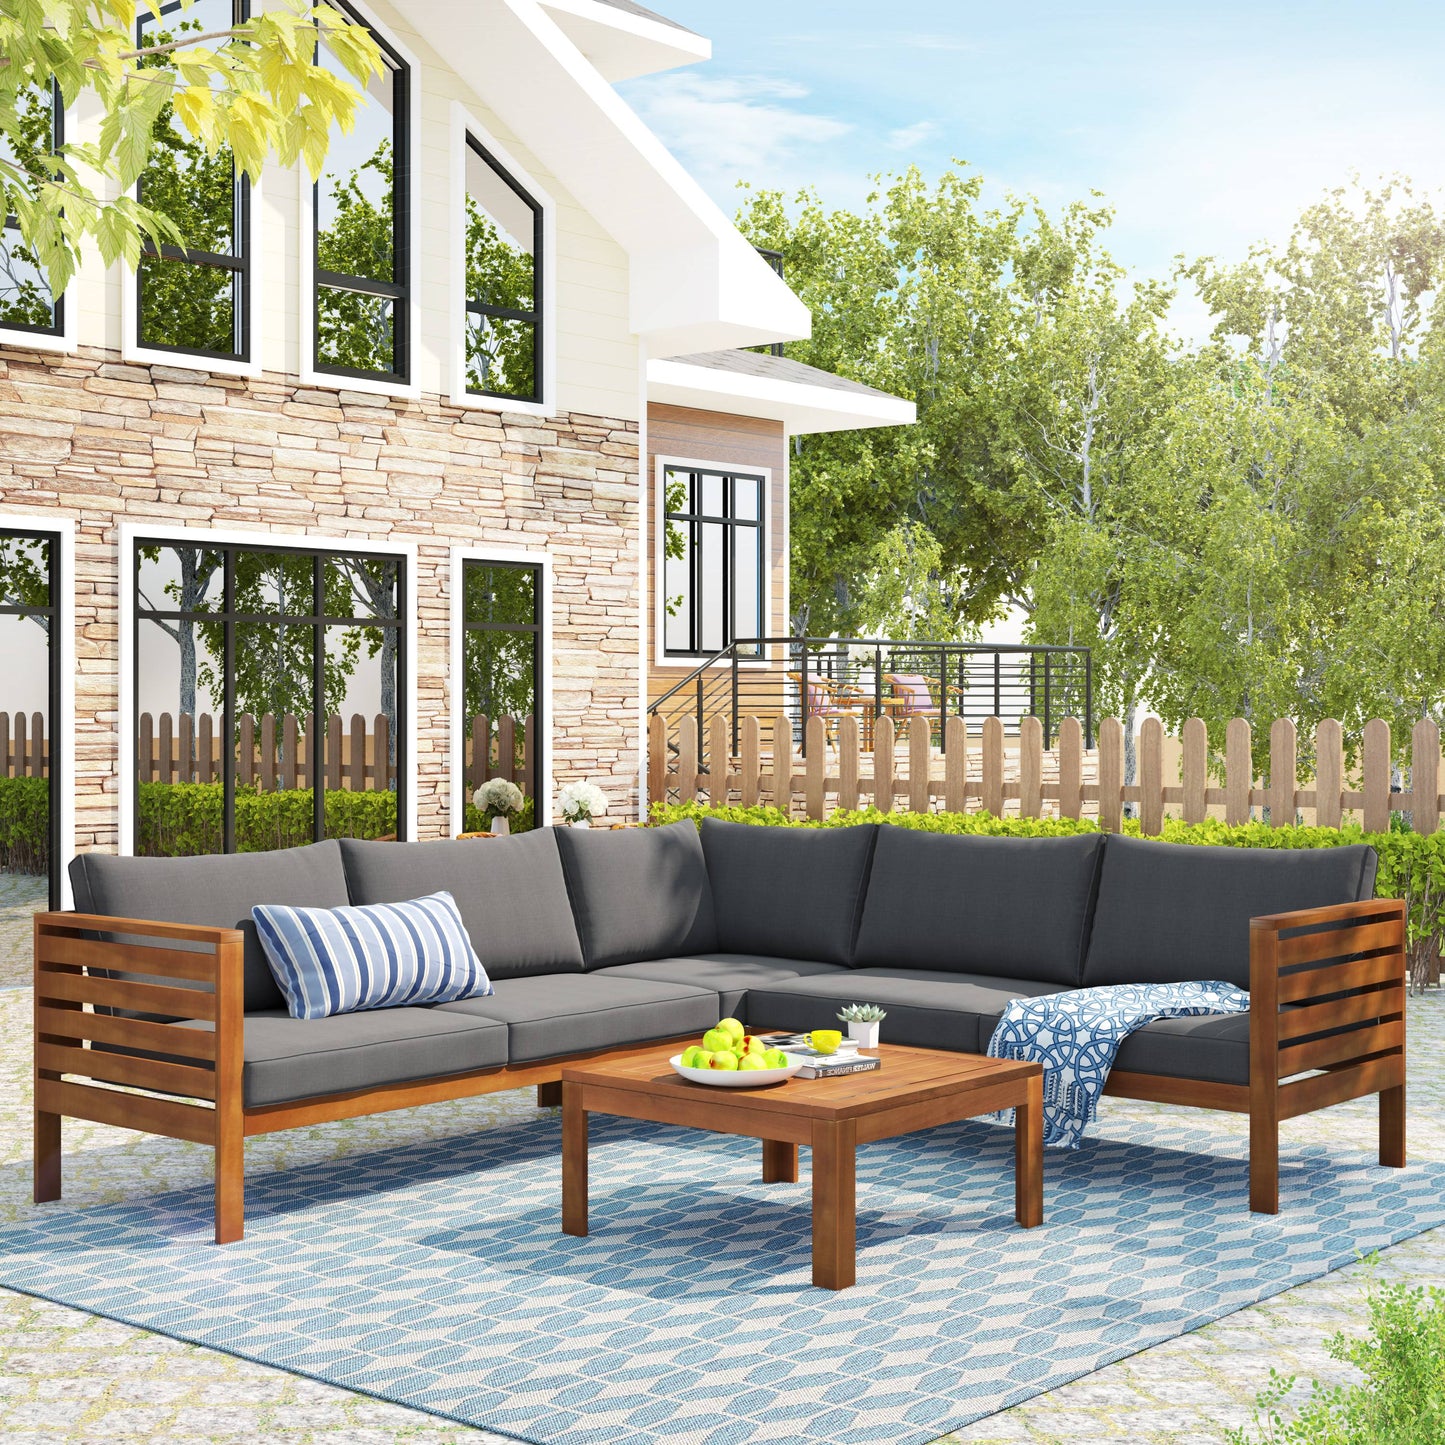 SYNGAR 4 Piece Patio Sofa Set, Outdoor Conversation Sofa Chairs Set with Coffee Table, Wood Sectional Furniture Set with Gray Cushions, for Backyard, Poolside, Balcony, Deck, Garden, D7480